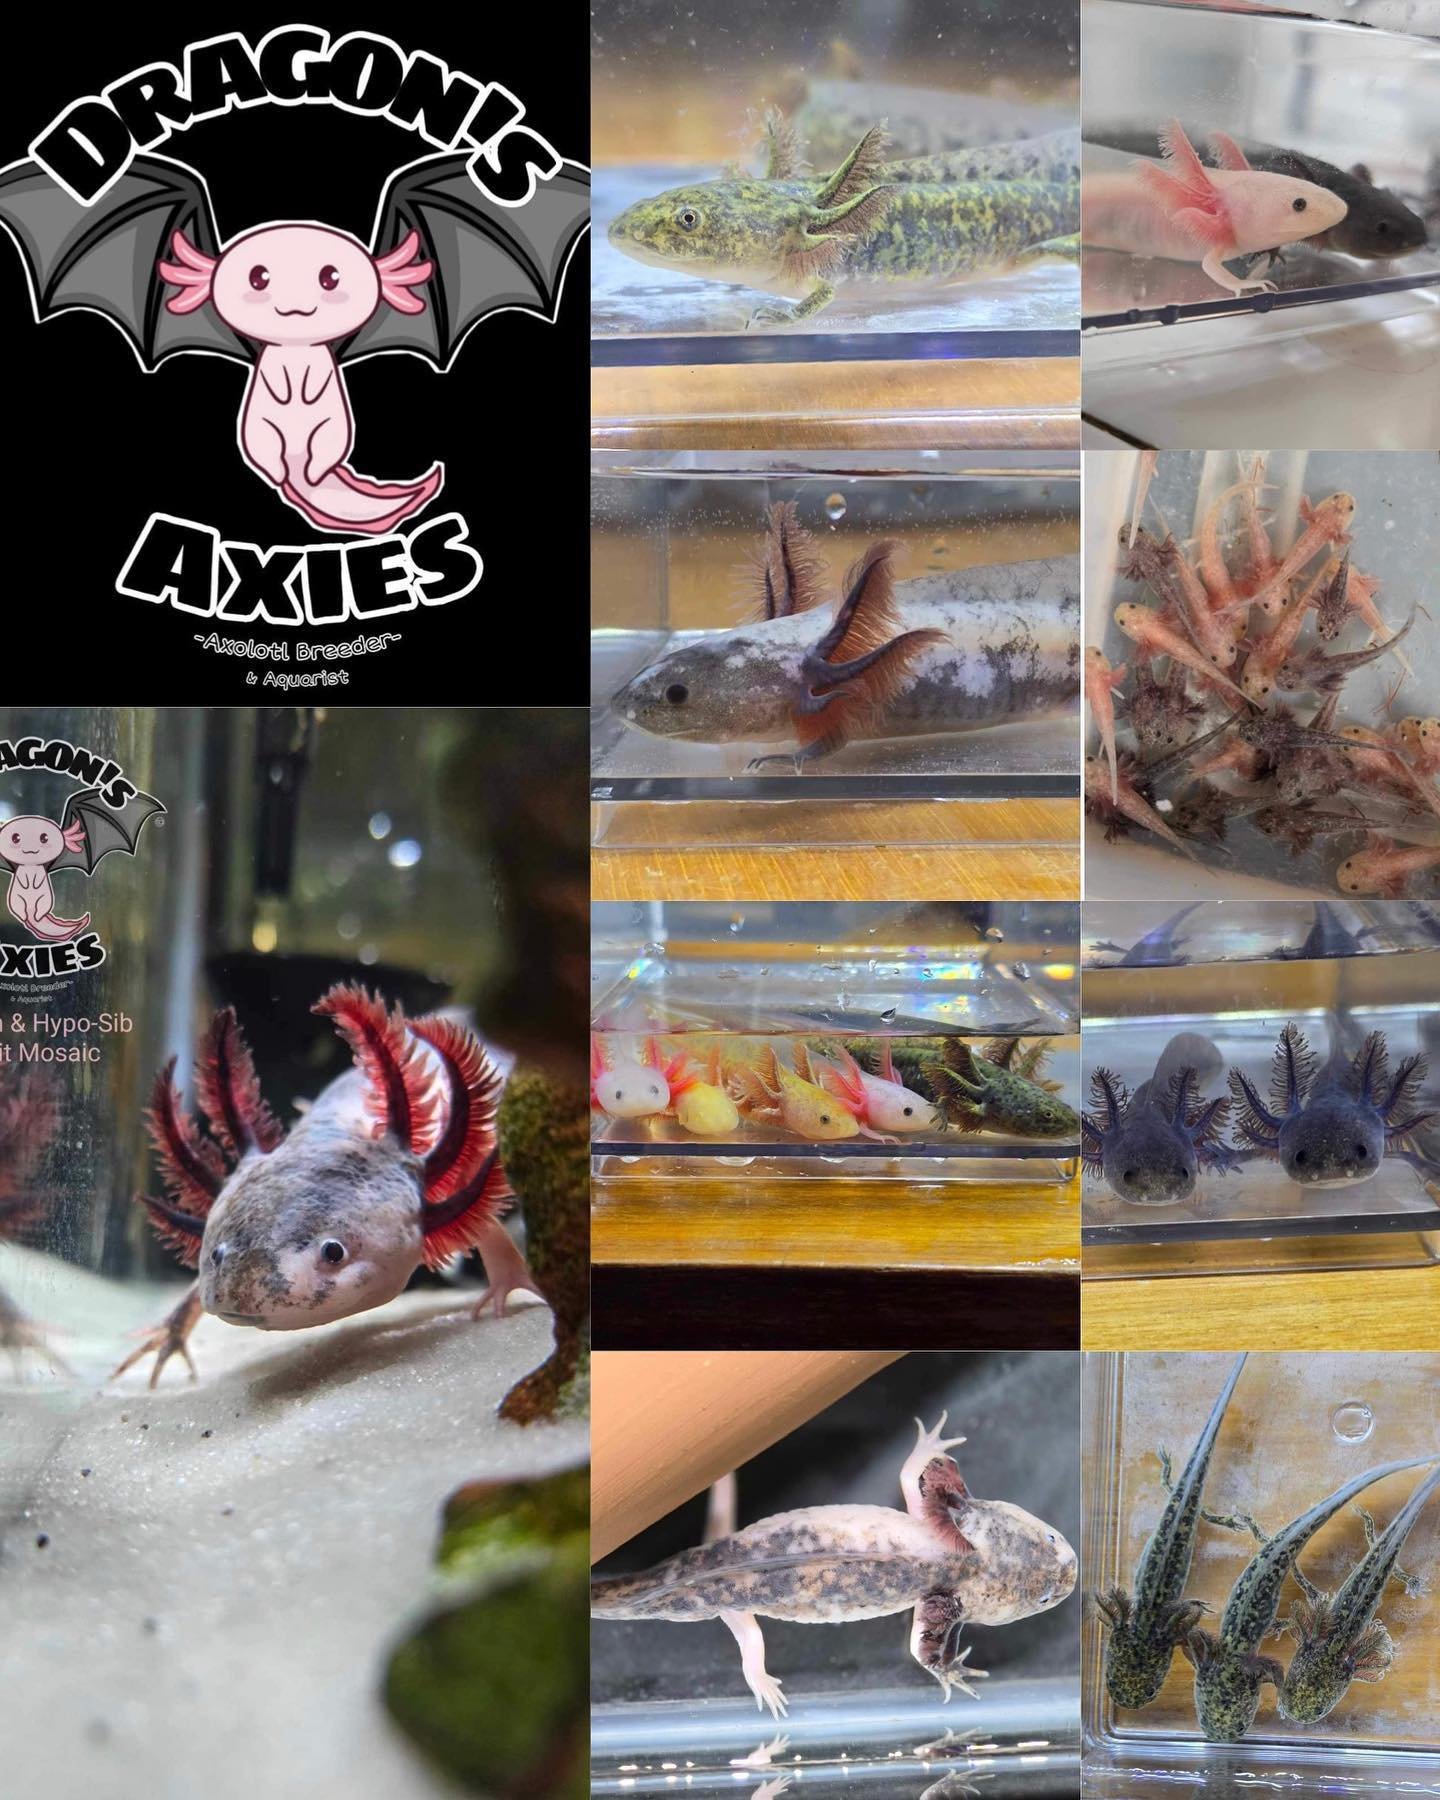 @dragonsaxies will be joining us June 2nd! 

They will have a gorgeous selection of axolotls available along with other cute Axolotl merch. 

Make sure to go and check them out! #axolotl #axoltolsofinstagram #exotic #exoticreptiles #reptile #reptiles